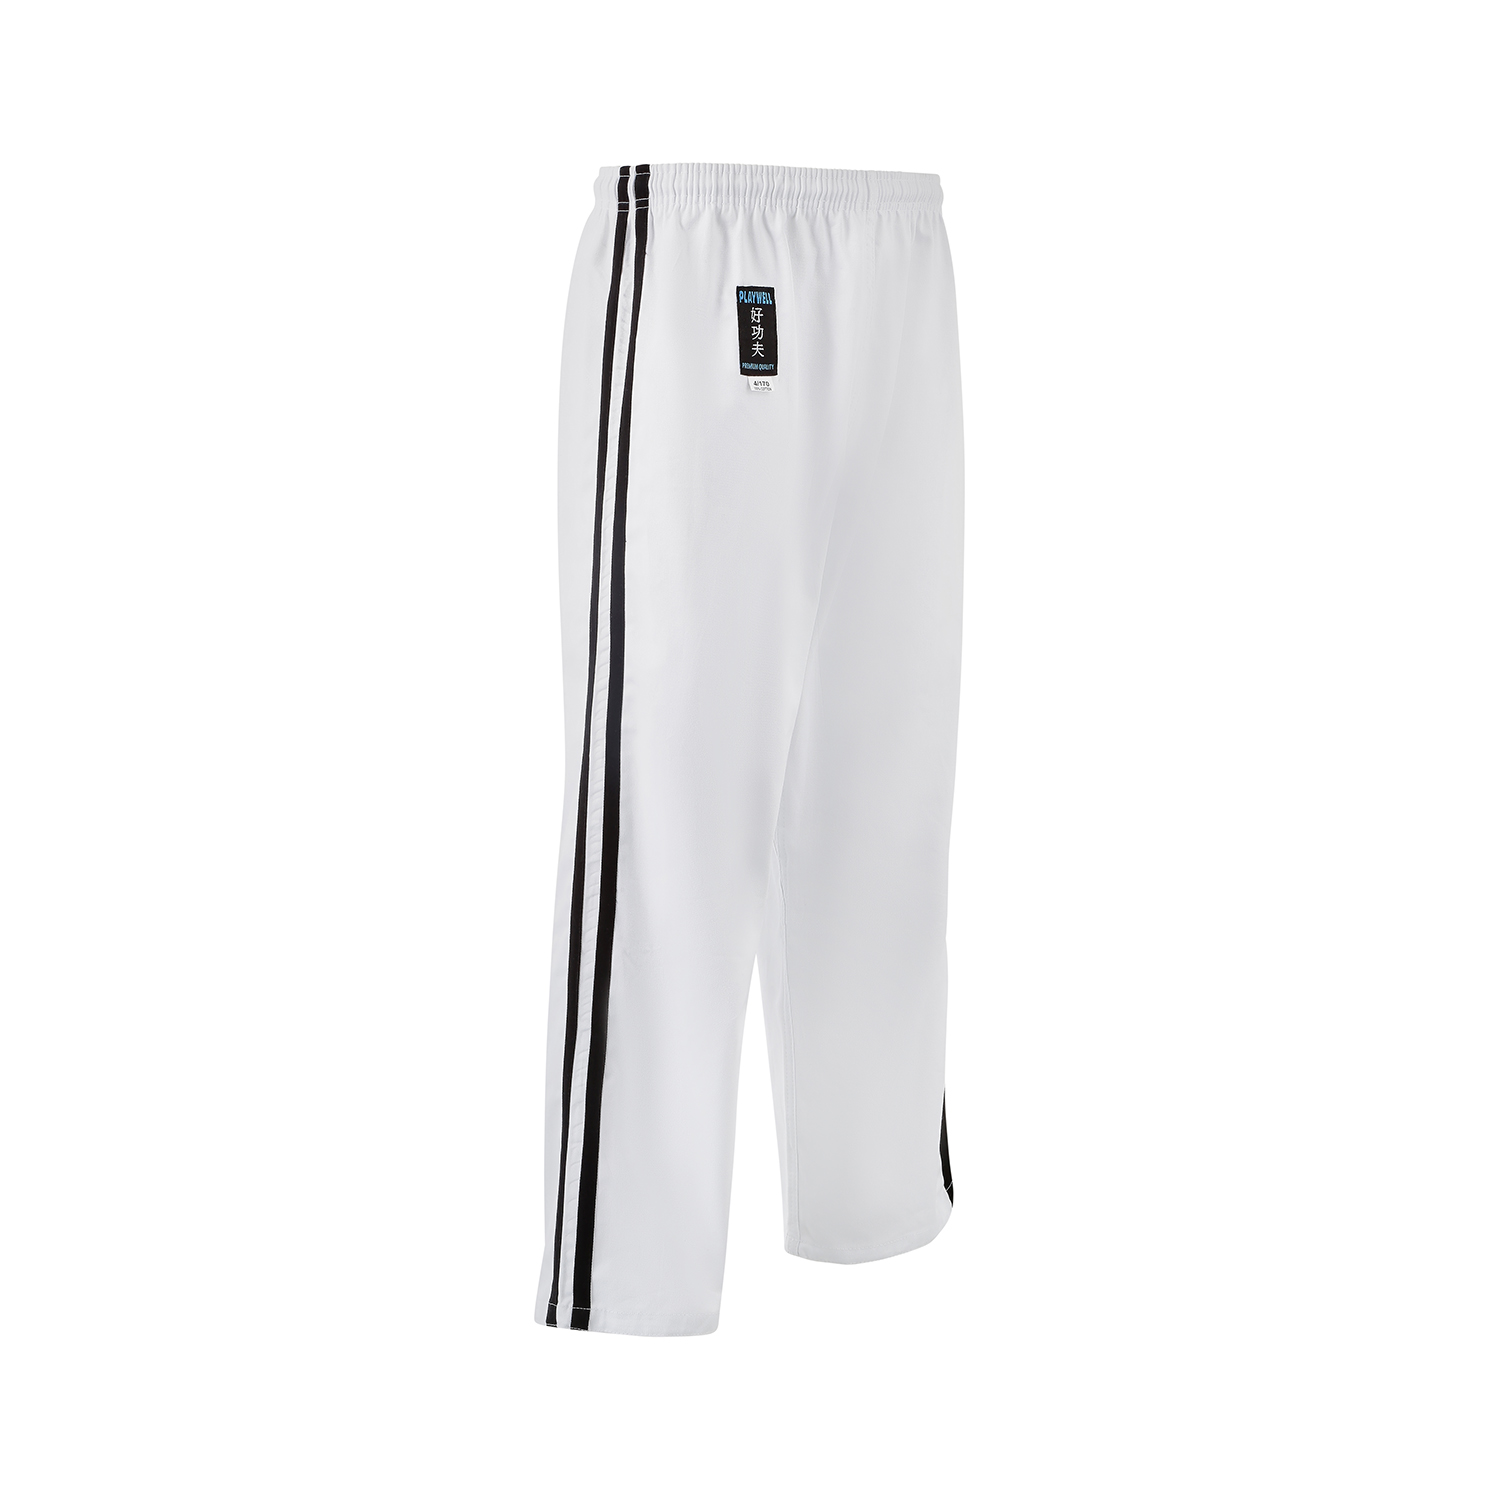 Full Contact Trousers - White W/ 2 Black Stripes Cotton - Click Image to Close